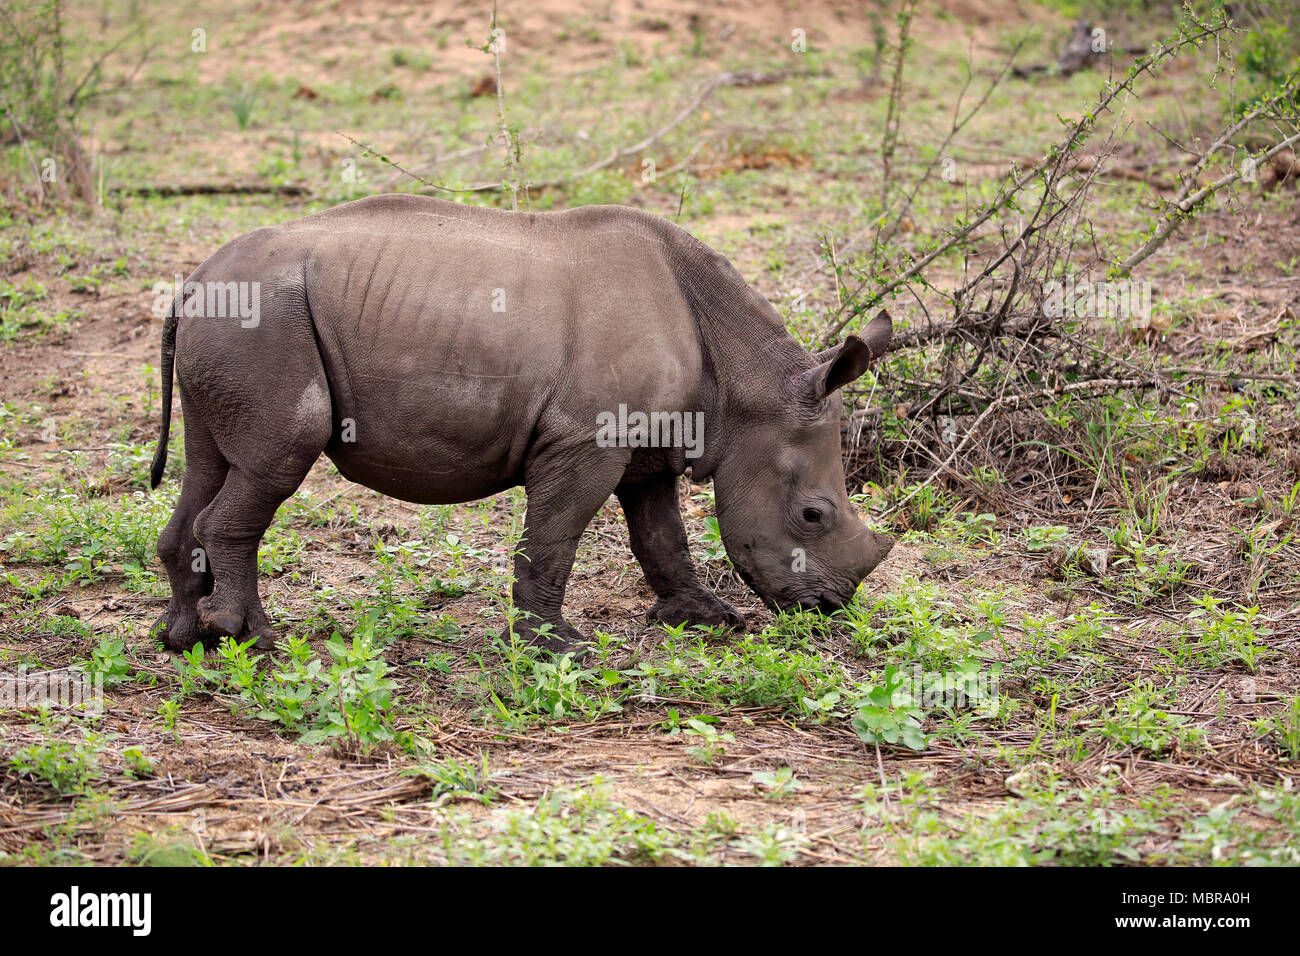 White rhinoceros (Ceratotherium simum), Young animal foraging, Pachyderm, Kruger National Park, South Africa Stock Photo